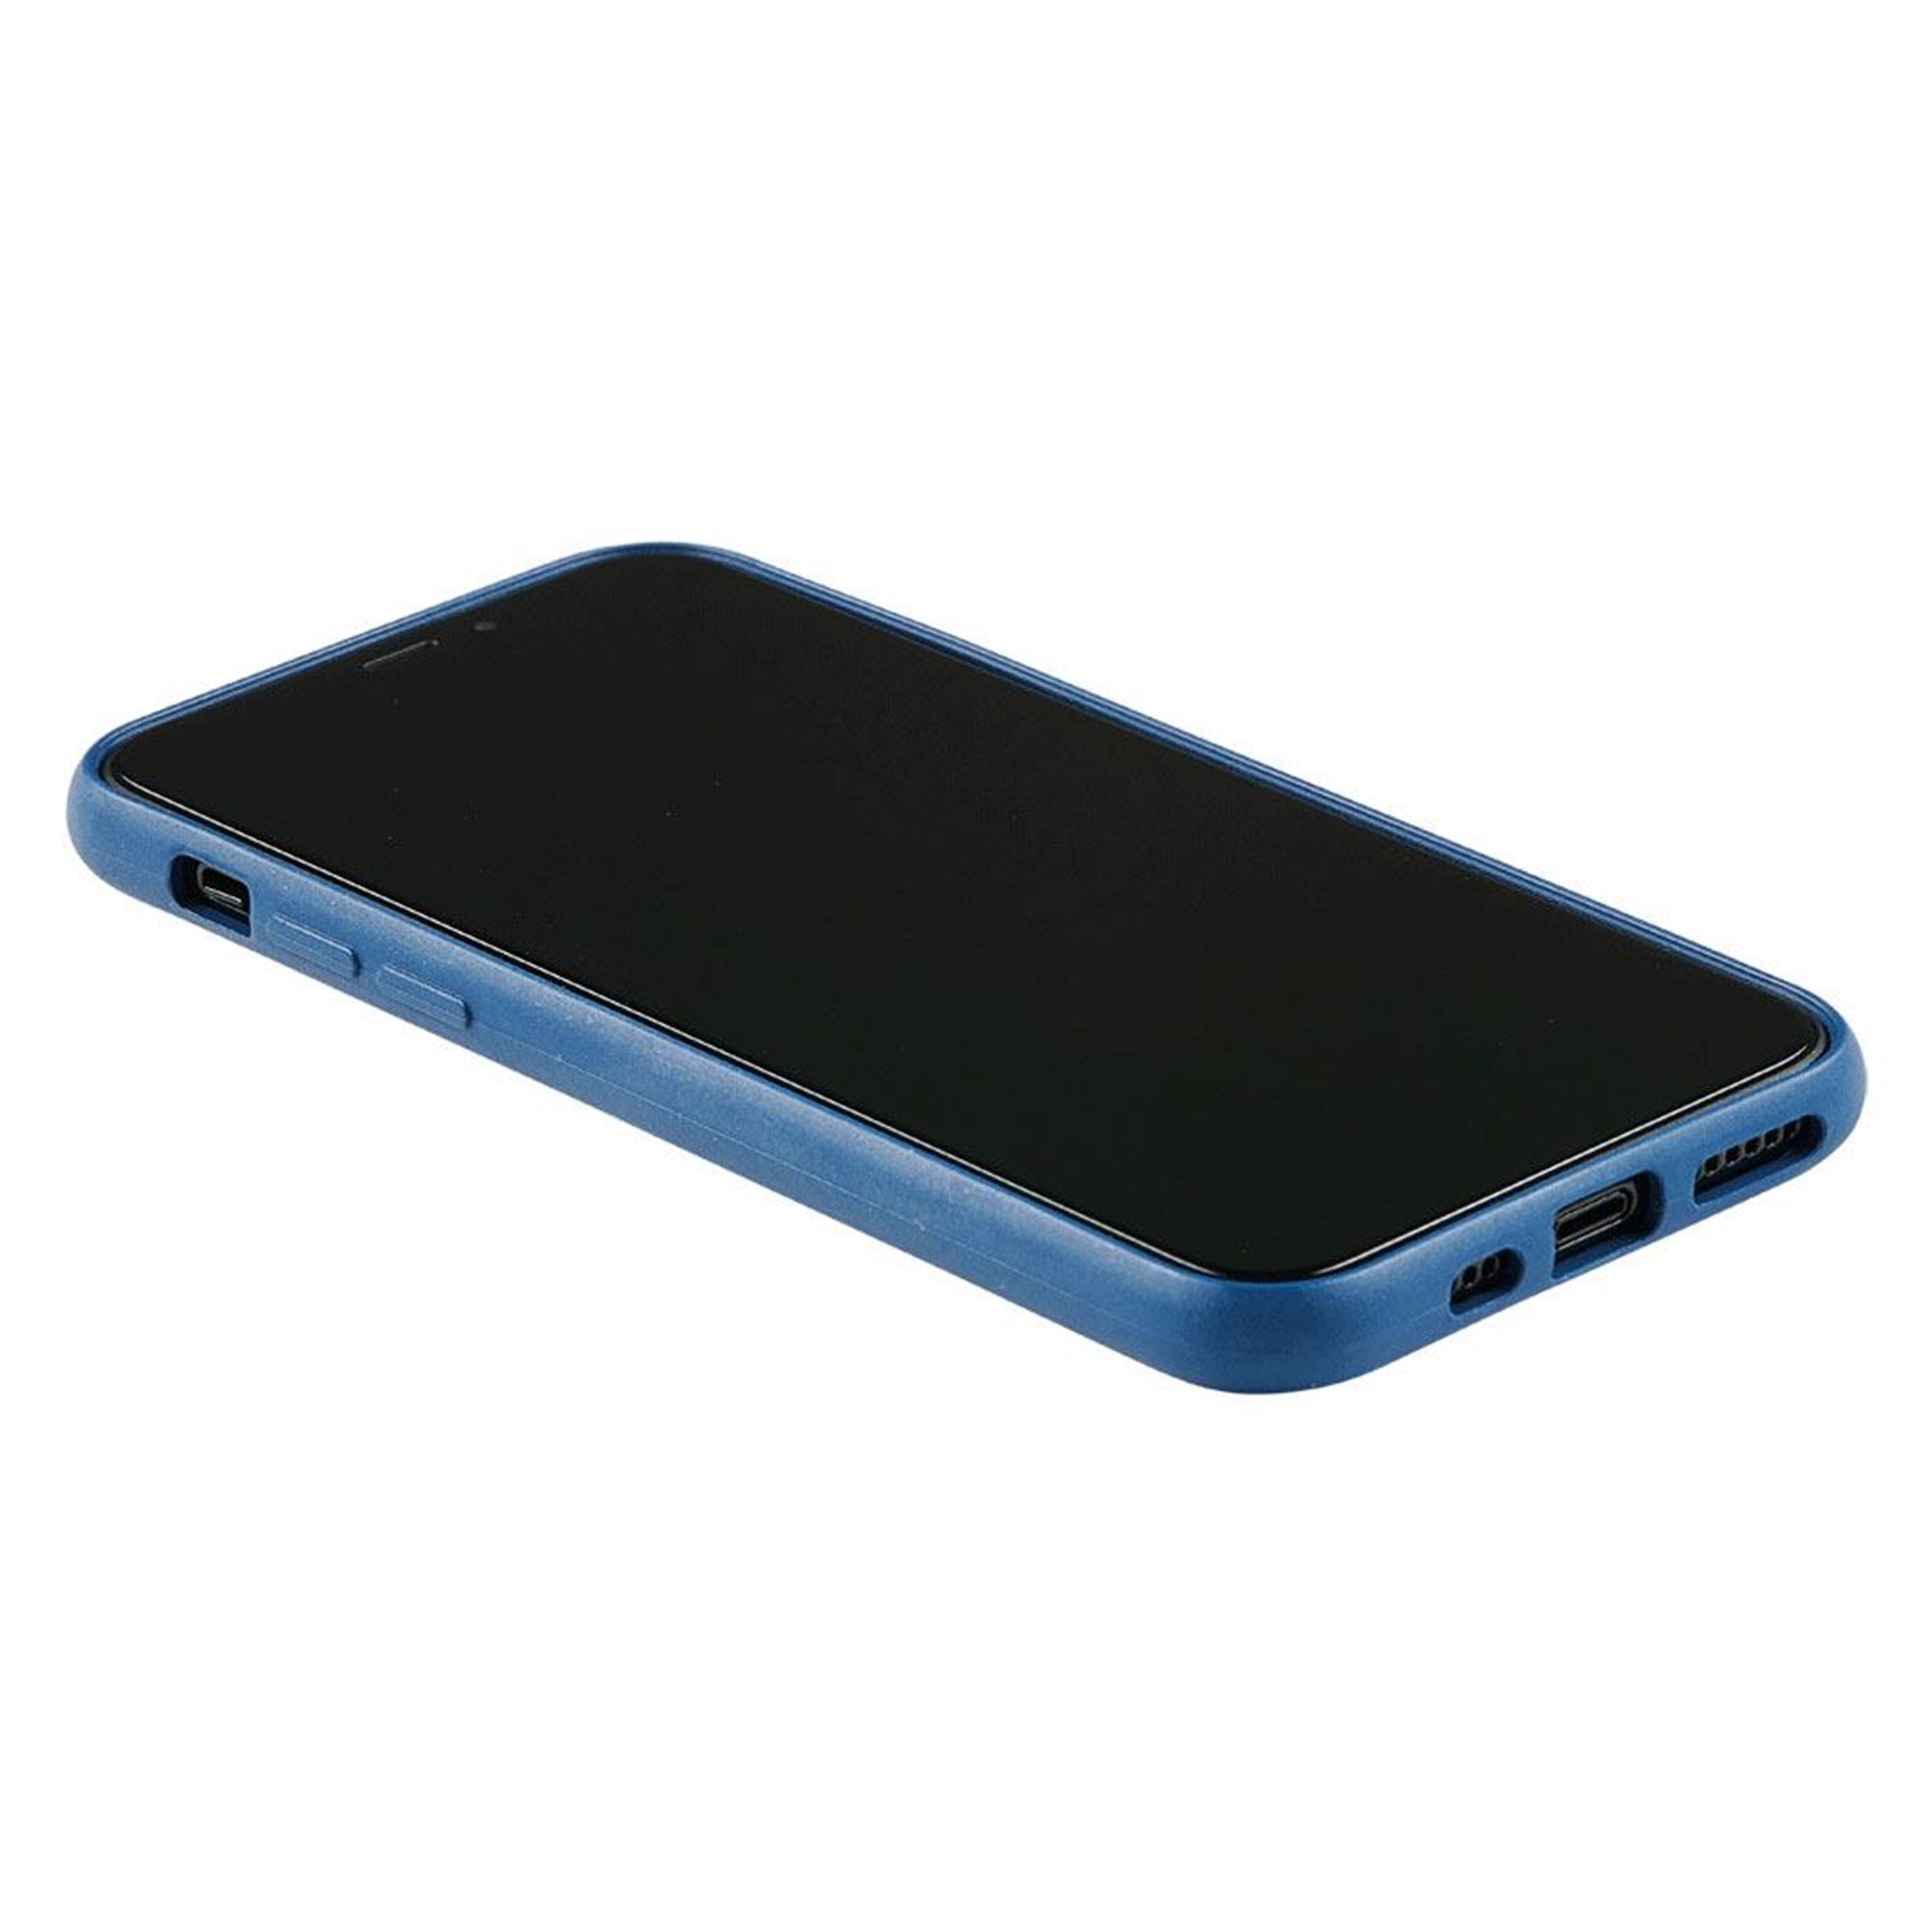 GreyLime-iPhone-11-Pro-Max-biodegradable-cover-Navy-blue-COIP11PM03-V3.jpg